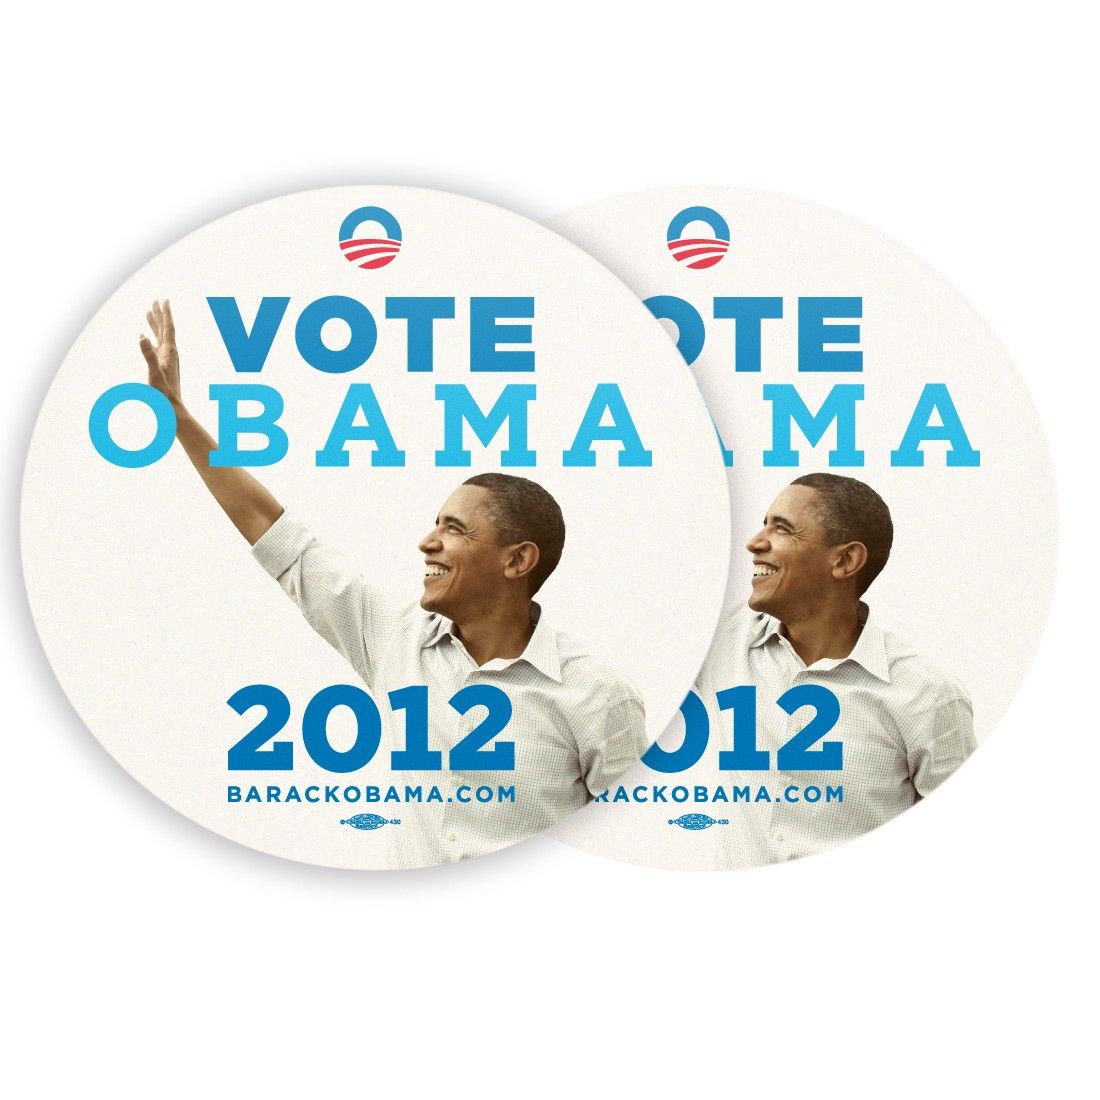 Vote Obama 2012 Button from Official President Obama Campaign